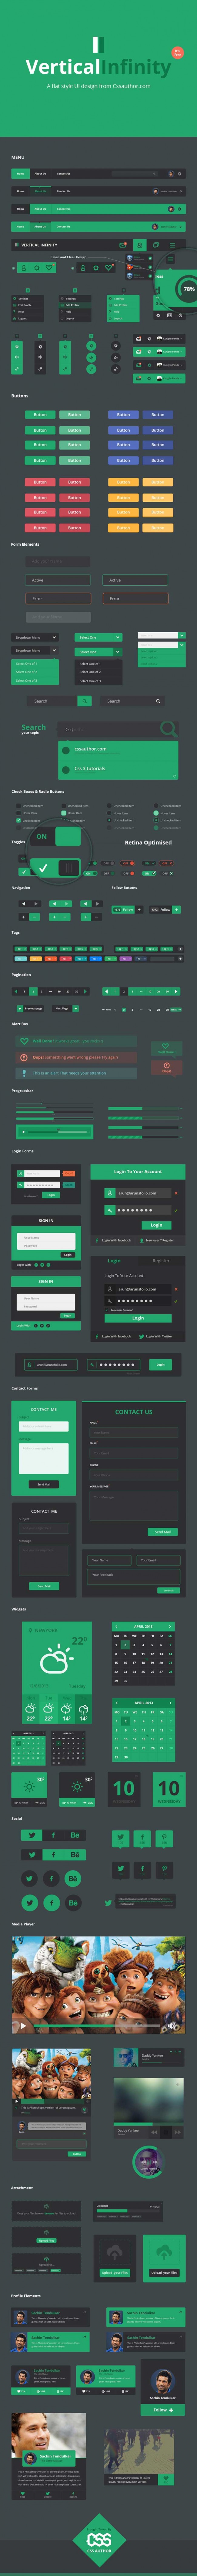 Vertical Infinity – A Mega Flat Style UI Kit PSD for Free Download cssauthor 650x8498 Weekly Fresh Resources for Designers and Developers [June 3rd,2013]